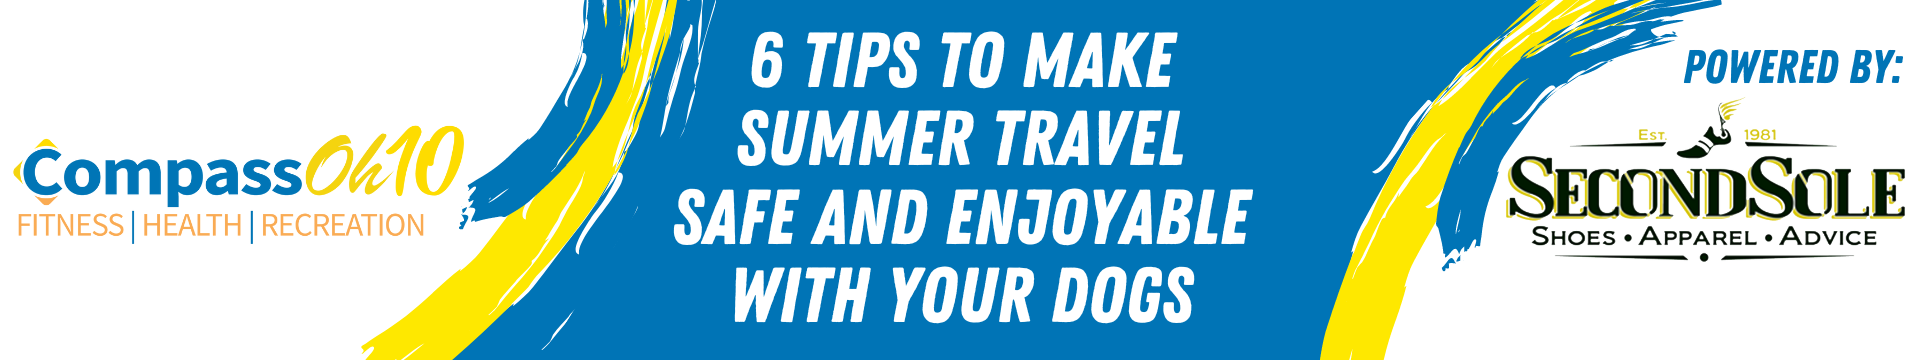 6 Tips to Make Summer Travel Safe and Enjoyable With Your Dogs